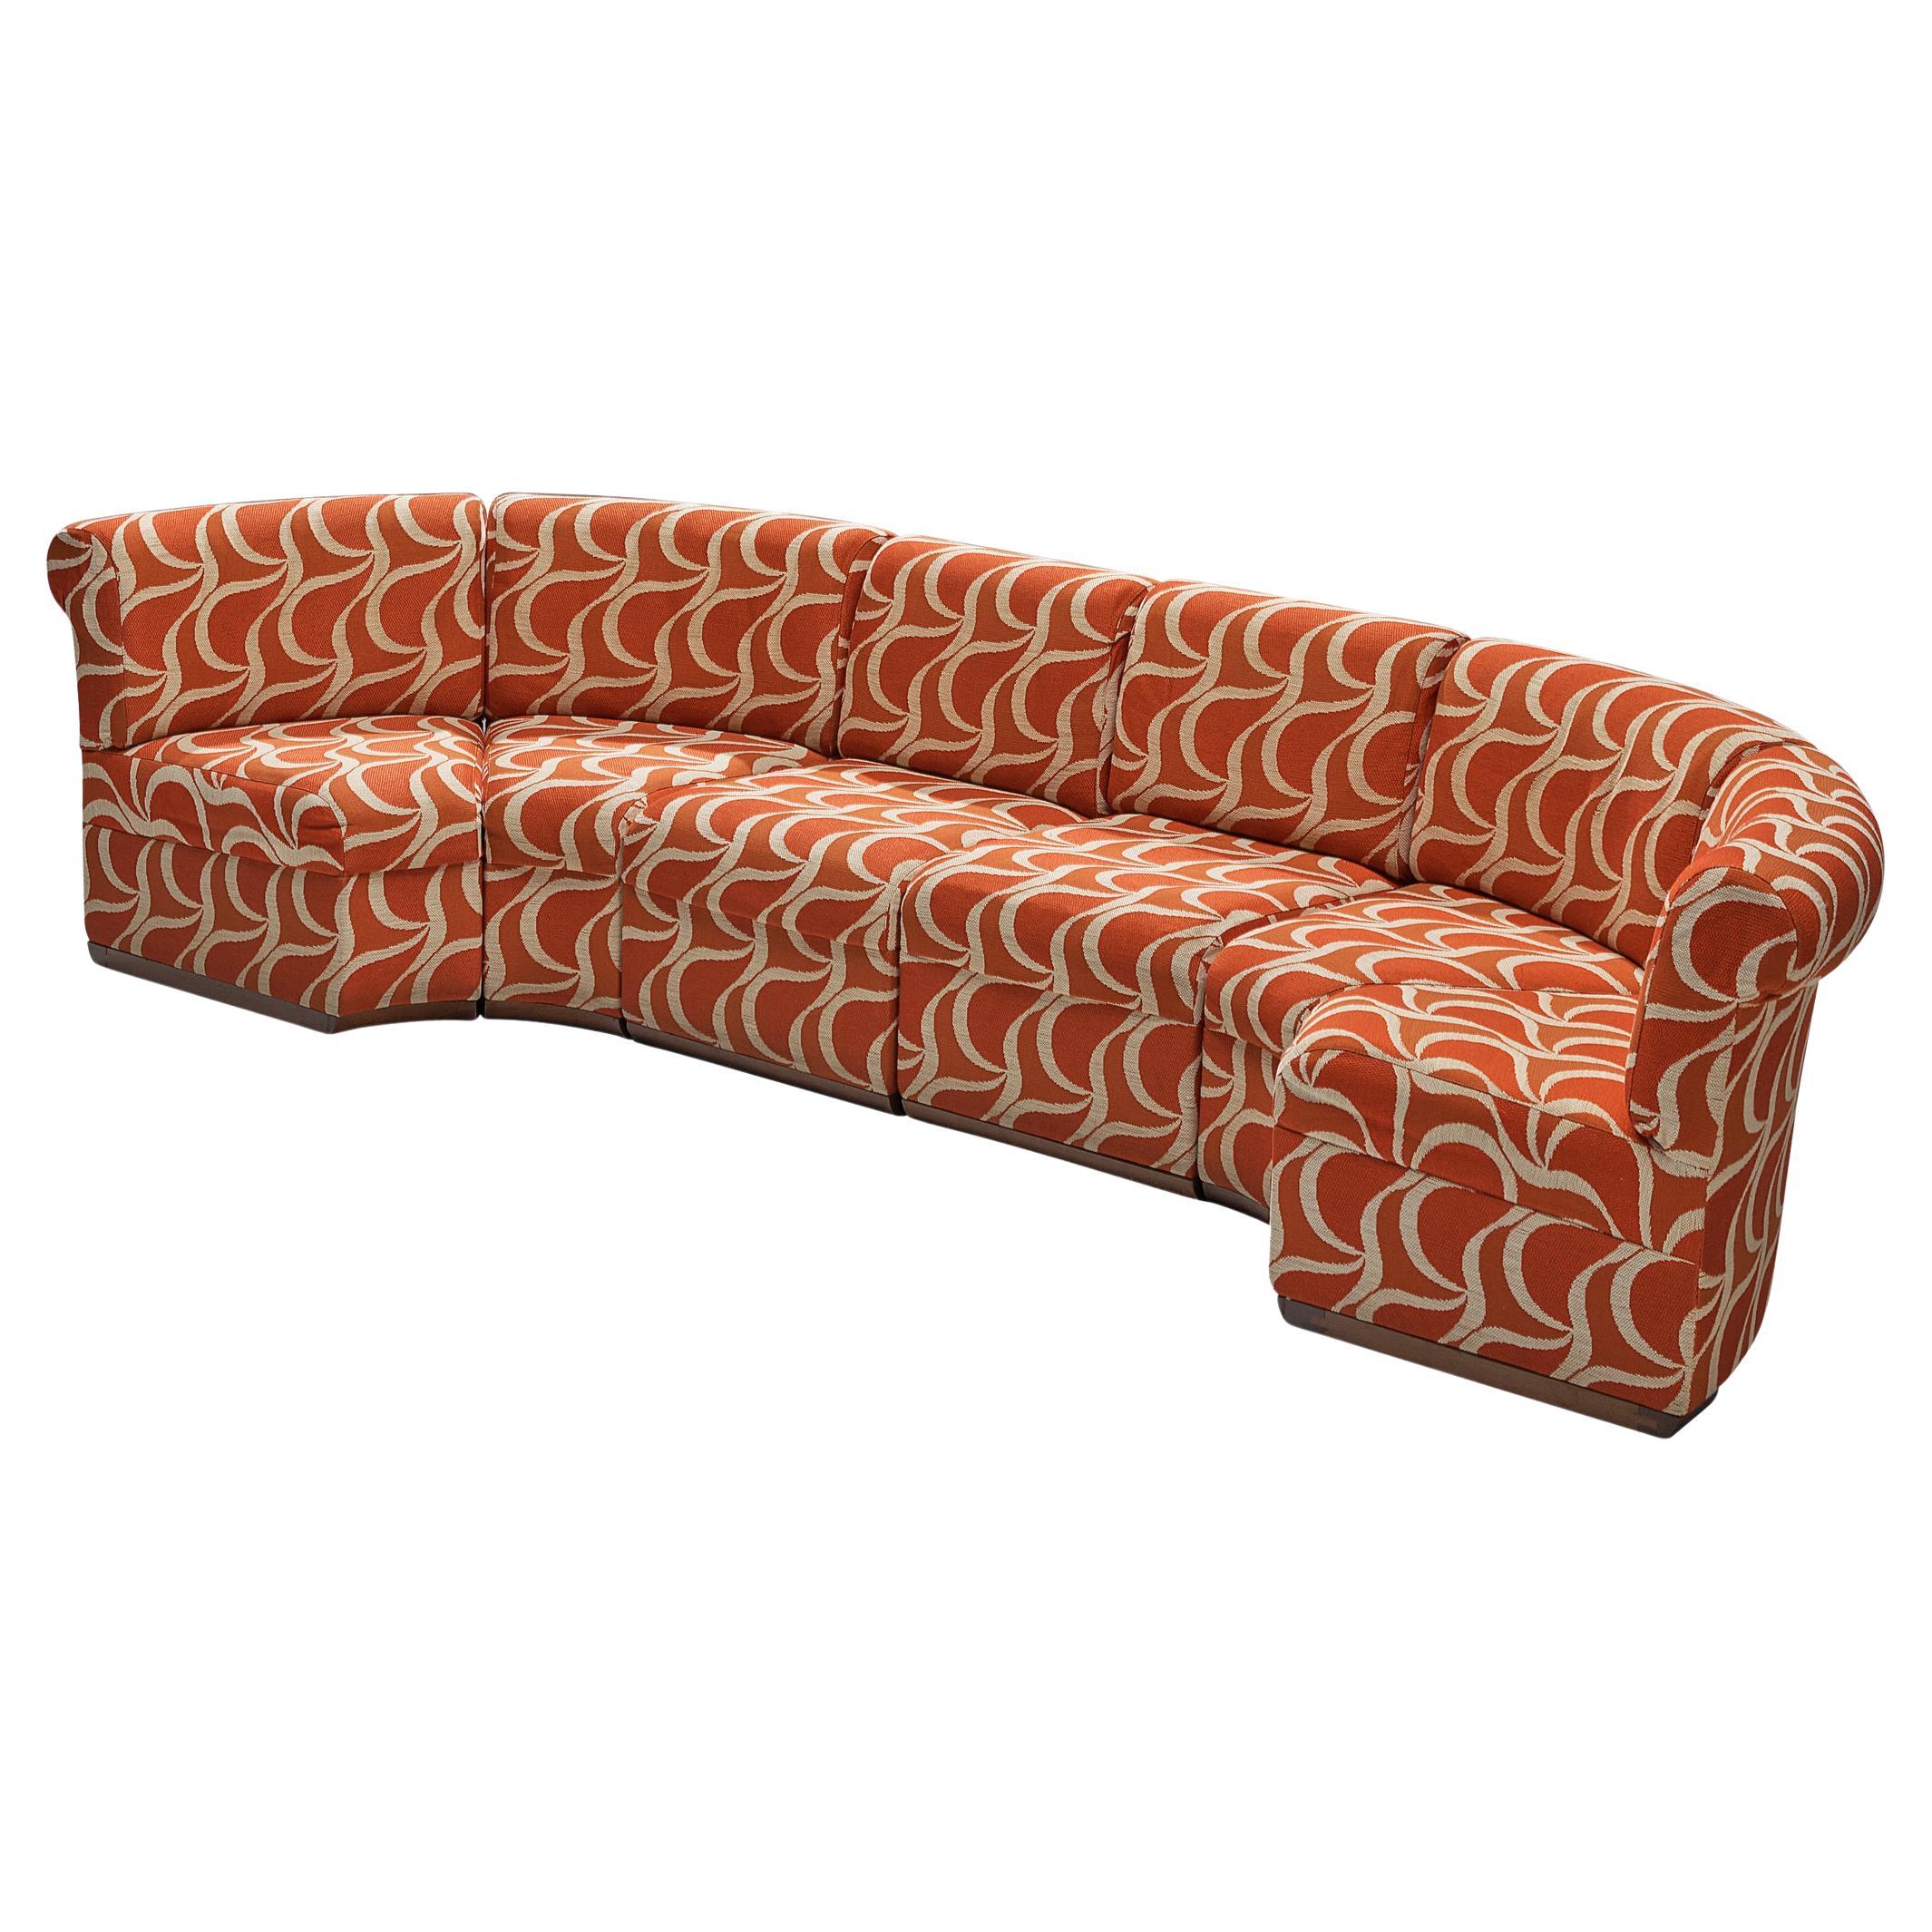 Italian Sectional Sofa in Red Orange Patterned Upholstery